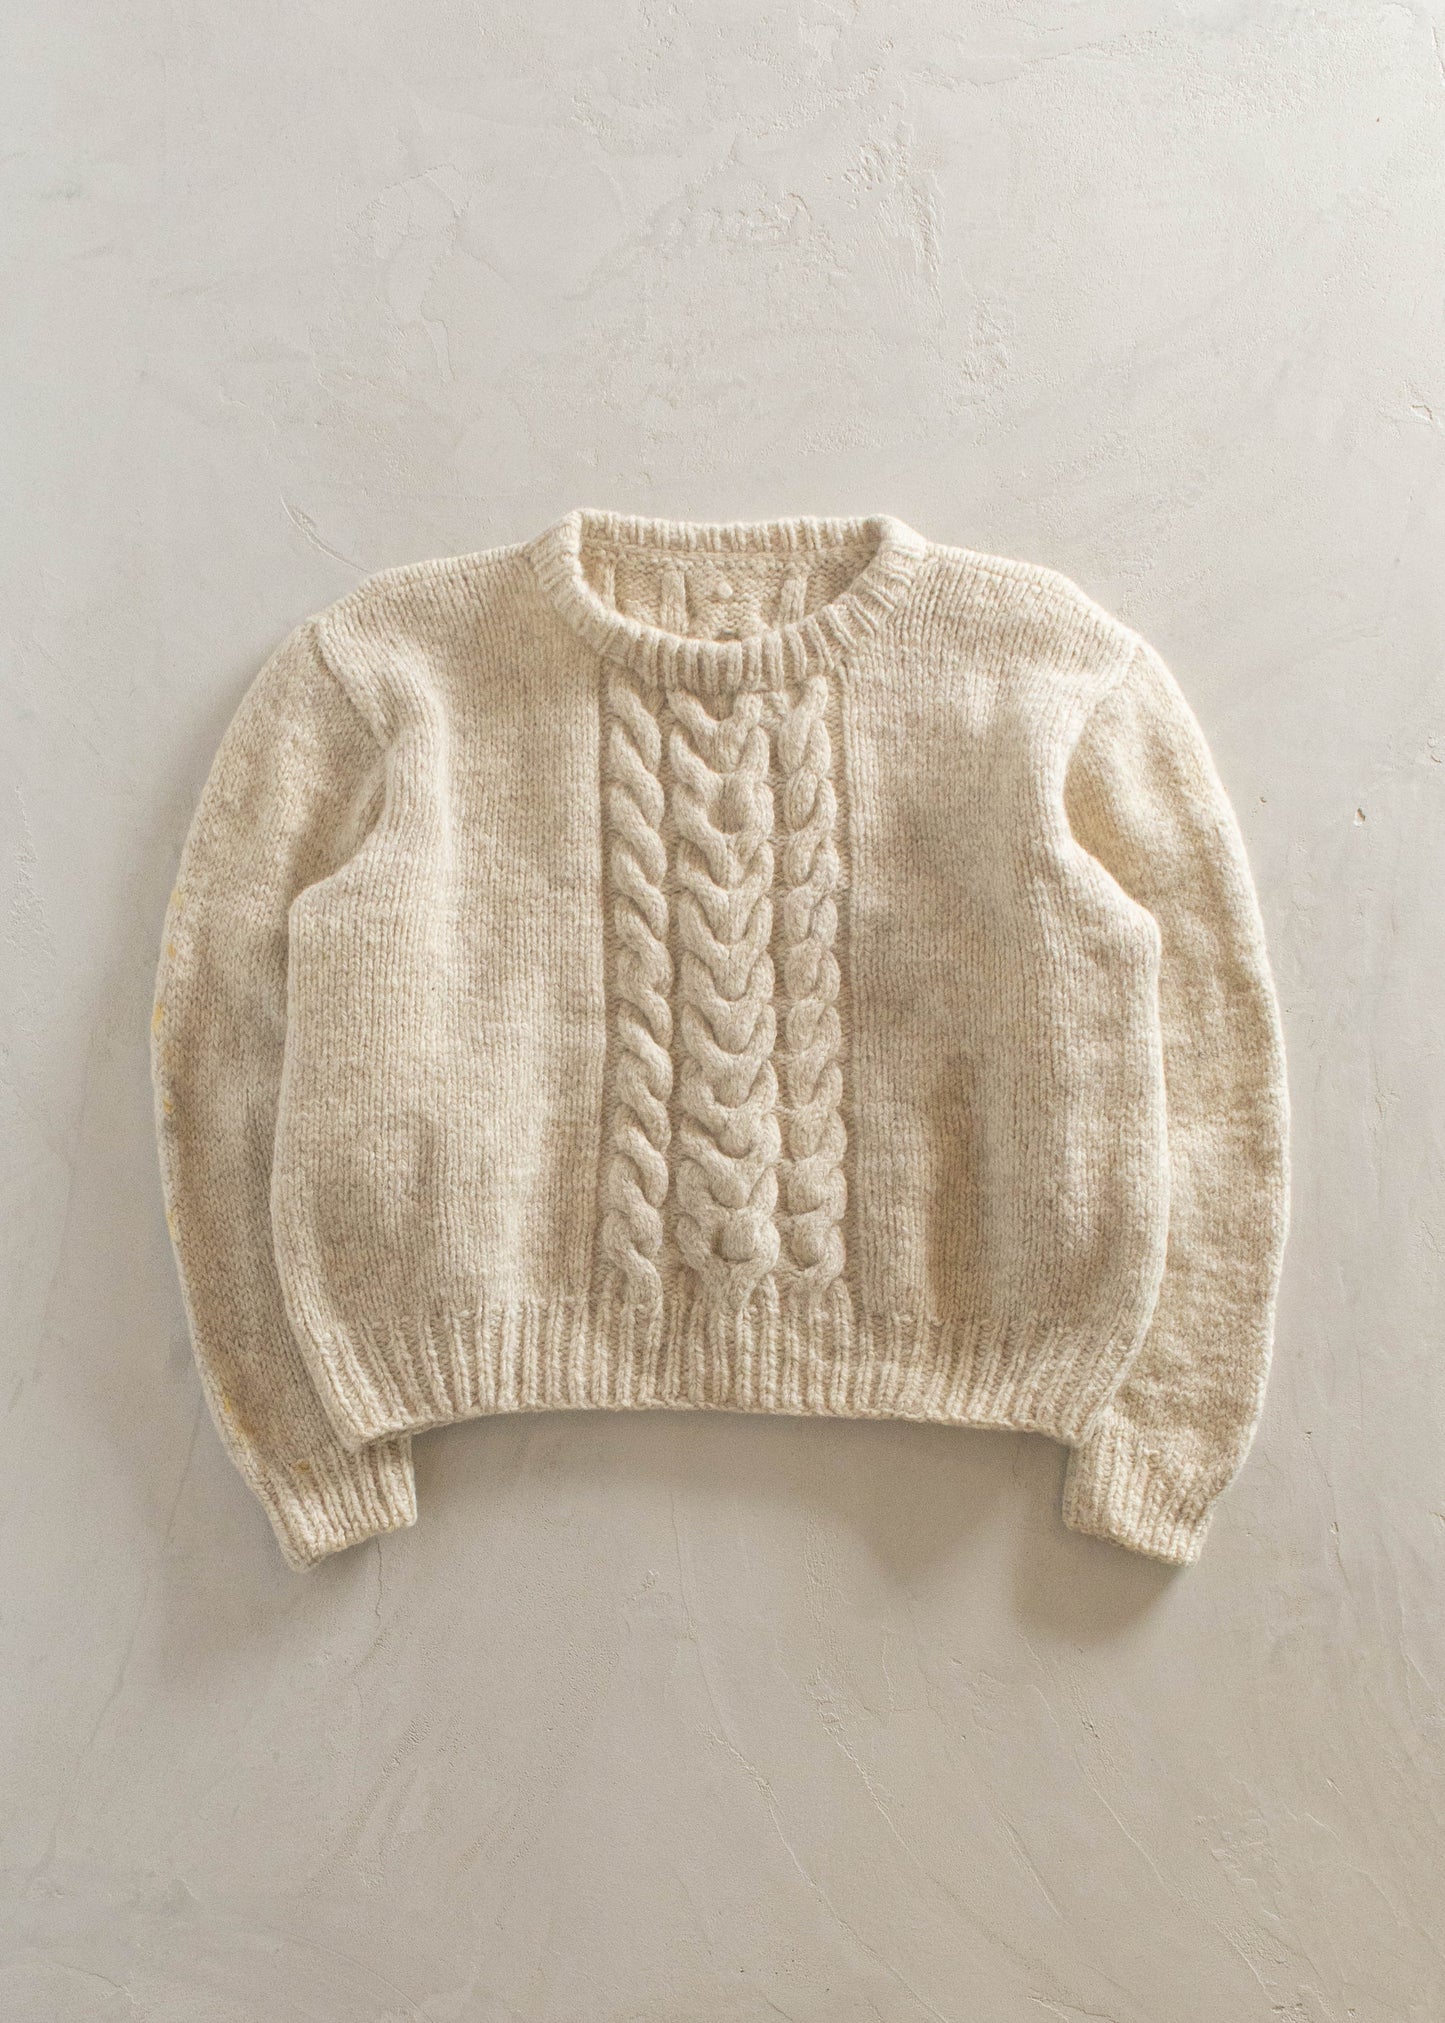 1980s Cable Knit Wool Fisherman Sweater Size M/L